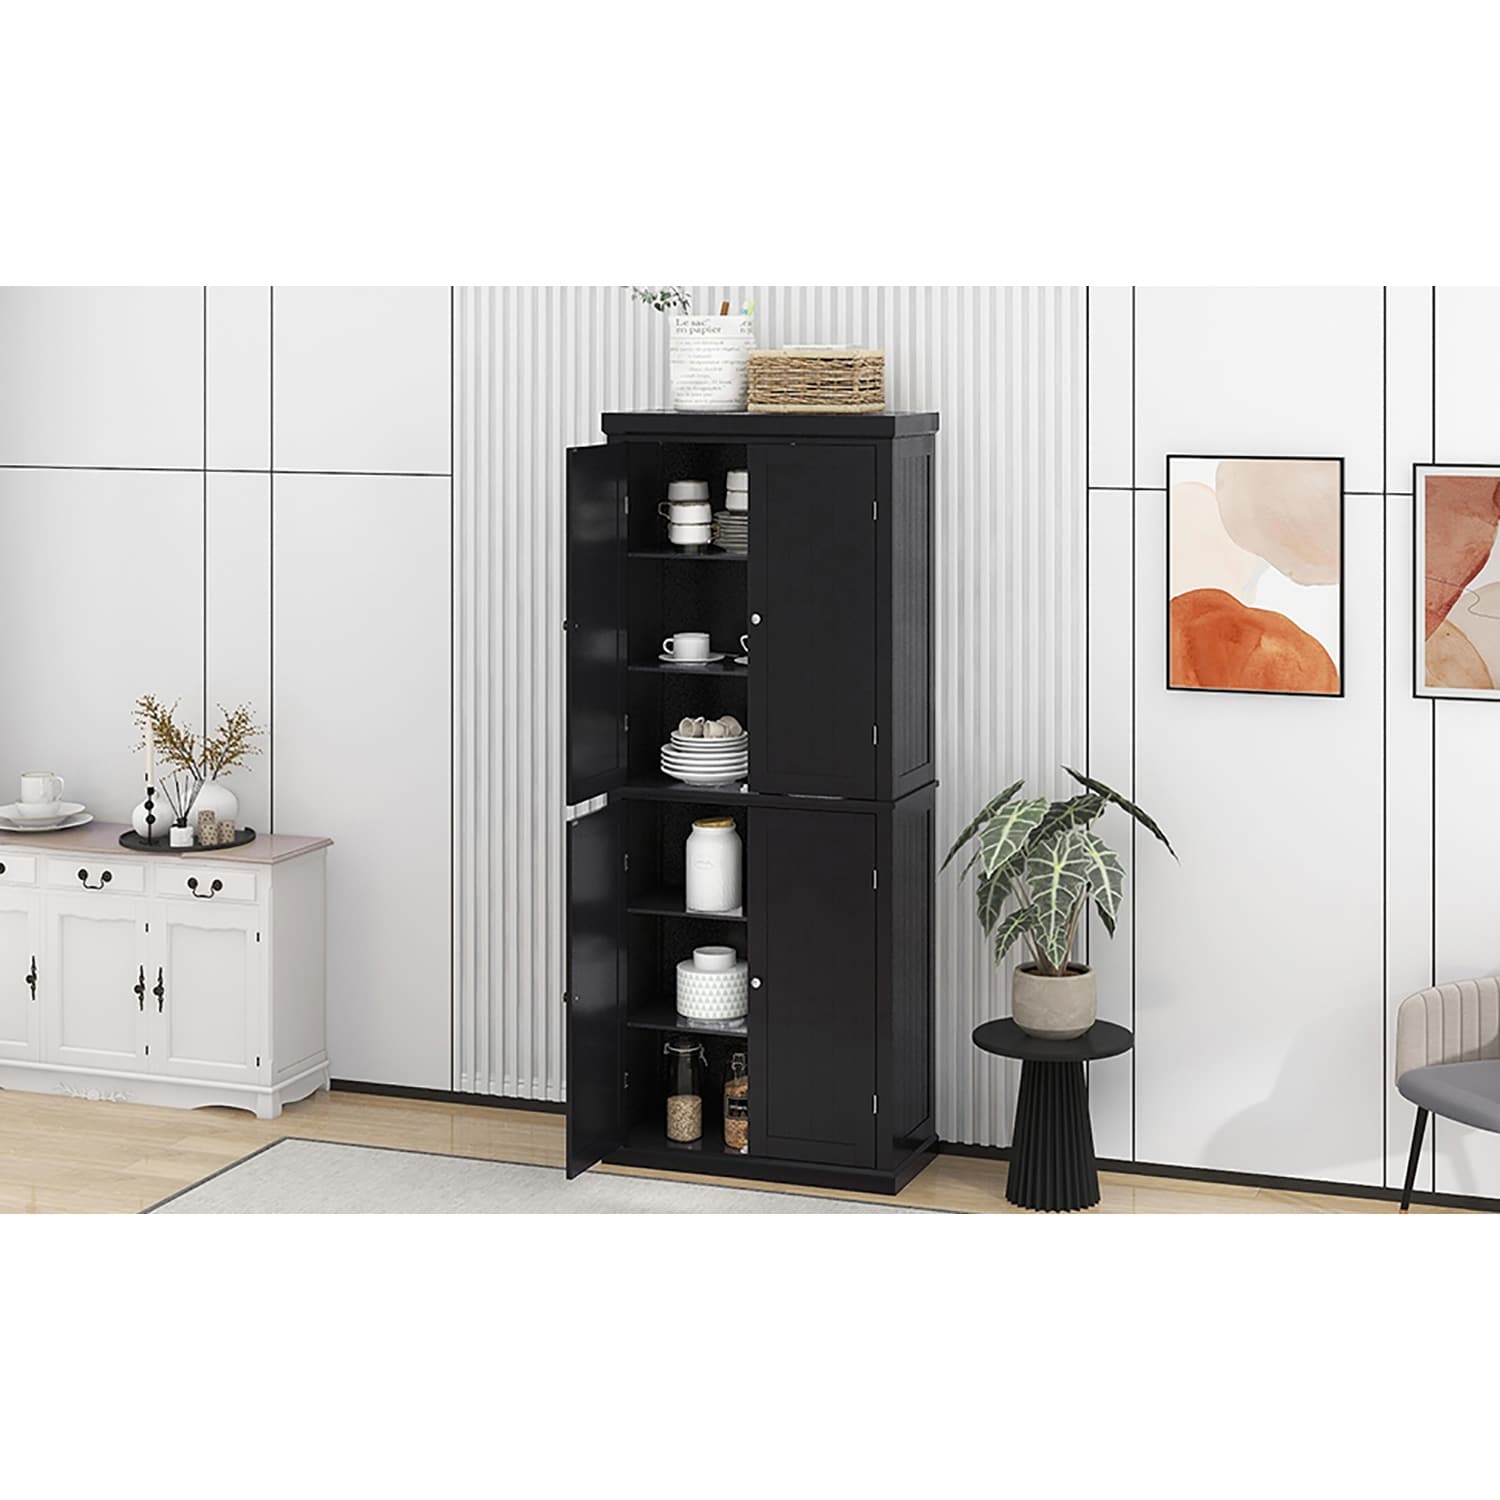 https://ak1.ostkcdn.com/images/products/is/images/direct/51e1b7576a3af057090d09d09ac5d21fc2dcb88f/Freestanding-Tall-Kitchen-Pantry%2C-Minimalist-Kitchen-Storage-Cabinet.jpg